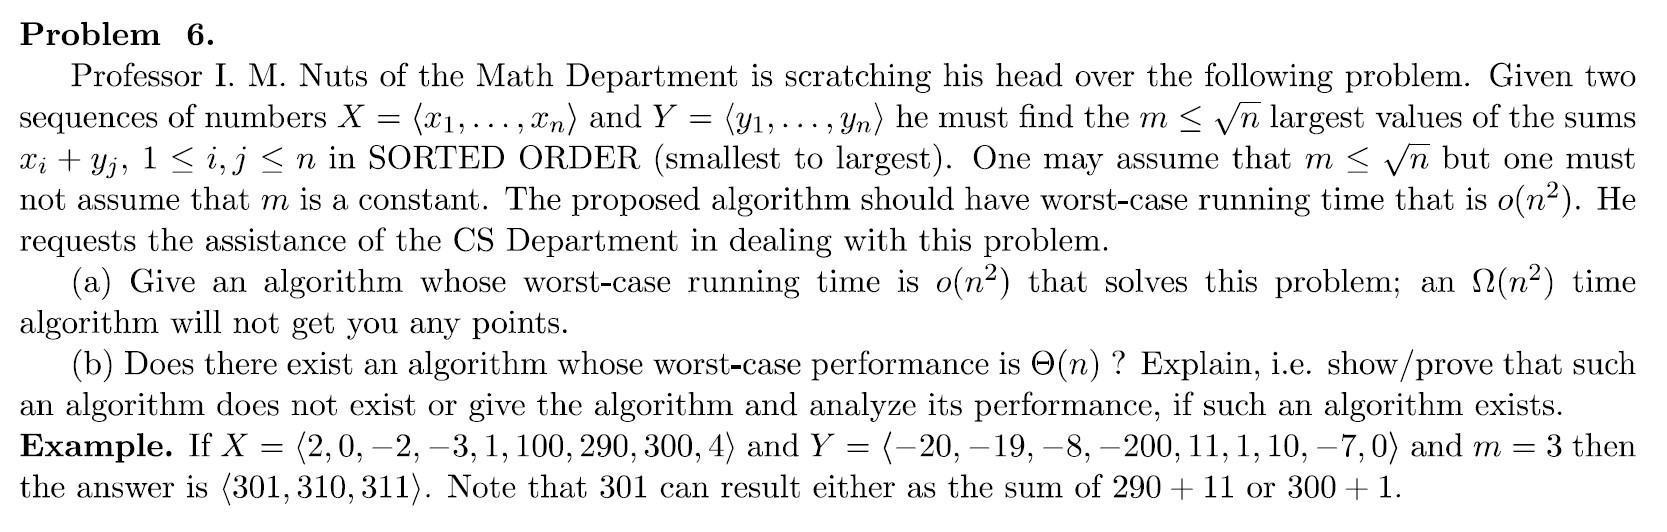 Professor I. M. Nuts of the Math Department is scratching his head over the following problem. Given two sequences of numbers